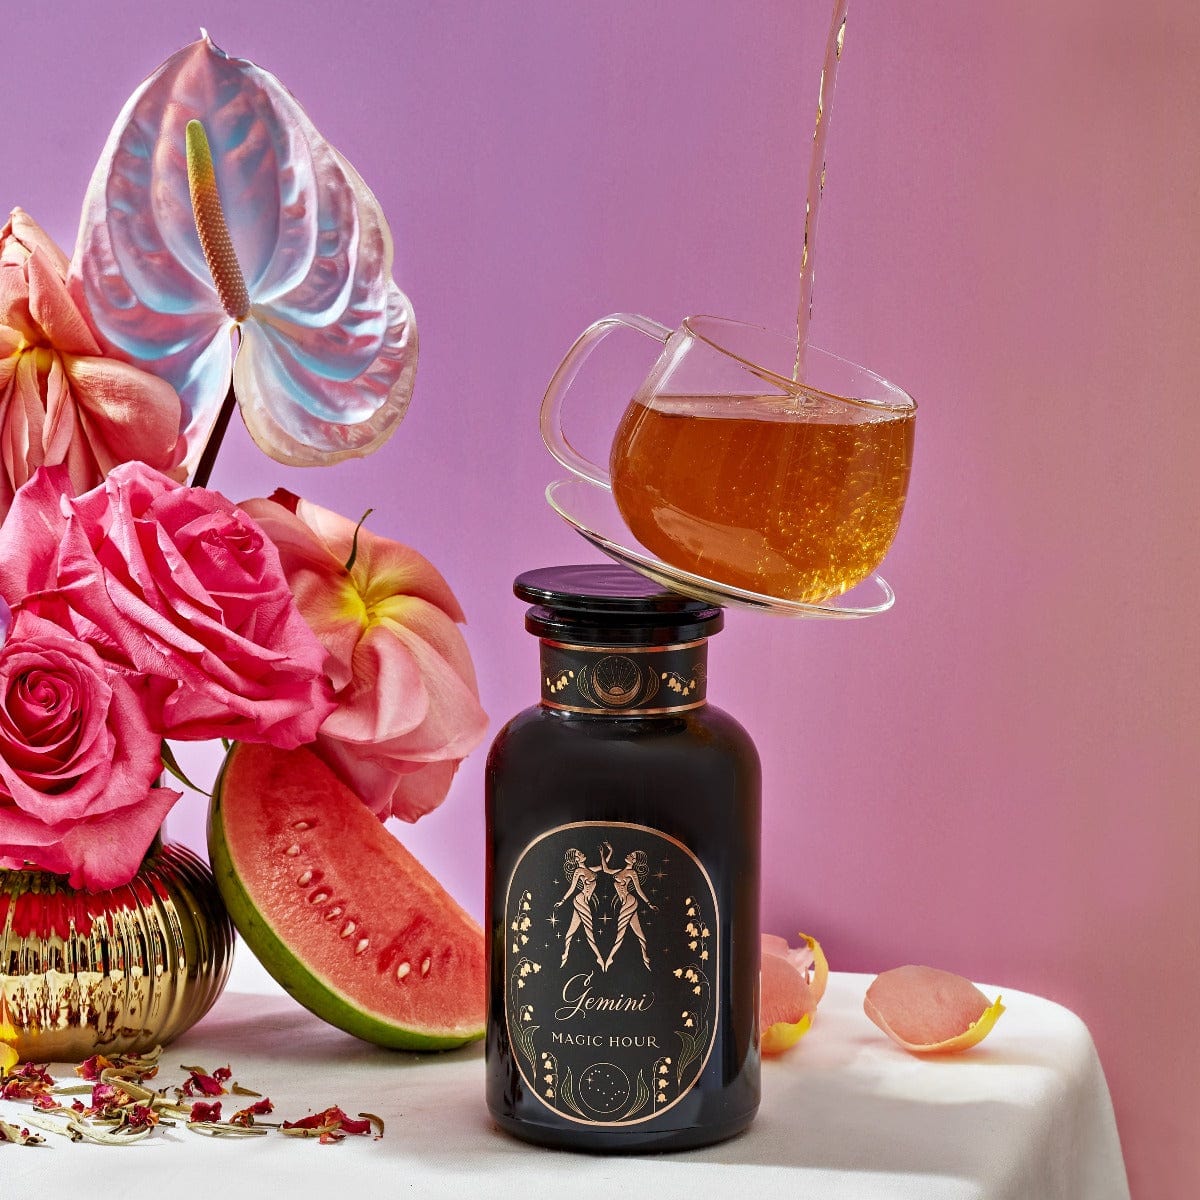 Gemini: Watermelon-Rose-Mulberry Pomegranate Tea for Beauty, Balance &amp; Quenching Curiositeas-Violet Glass Apothecary Jar with 3oz of Loose Leaf Tea-Magic Hour